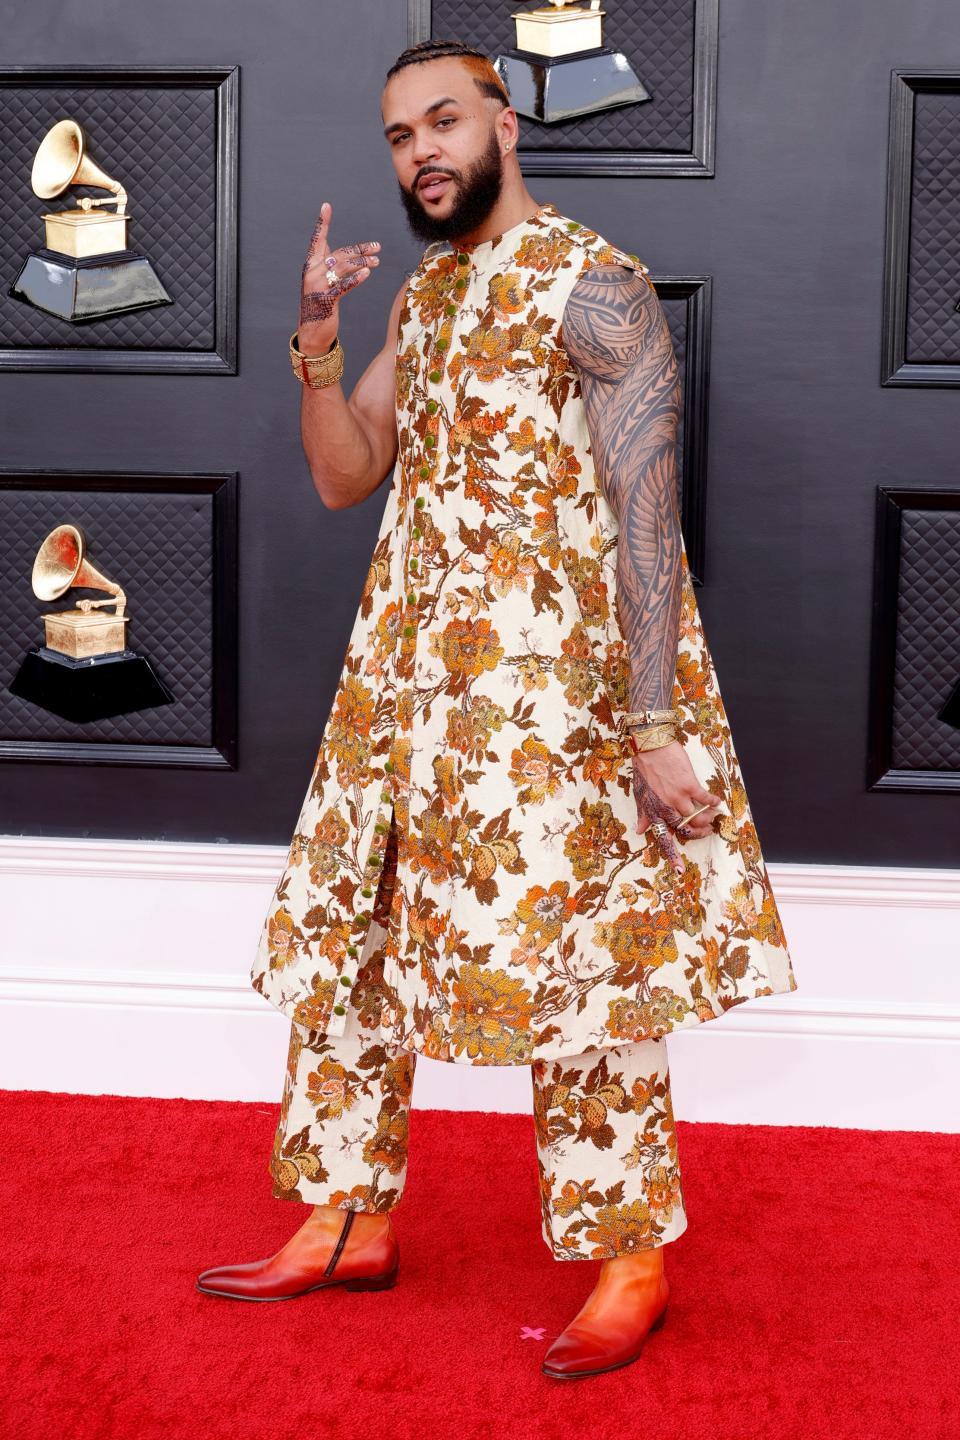 Jidenna in a beige flared dress tunic and matching pants with an orange floral print. He's wearing orange ombre boots.